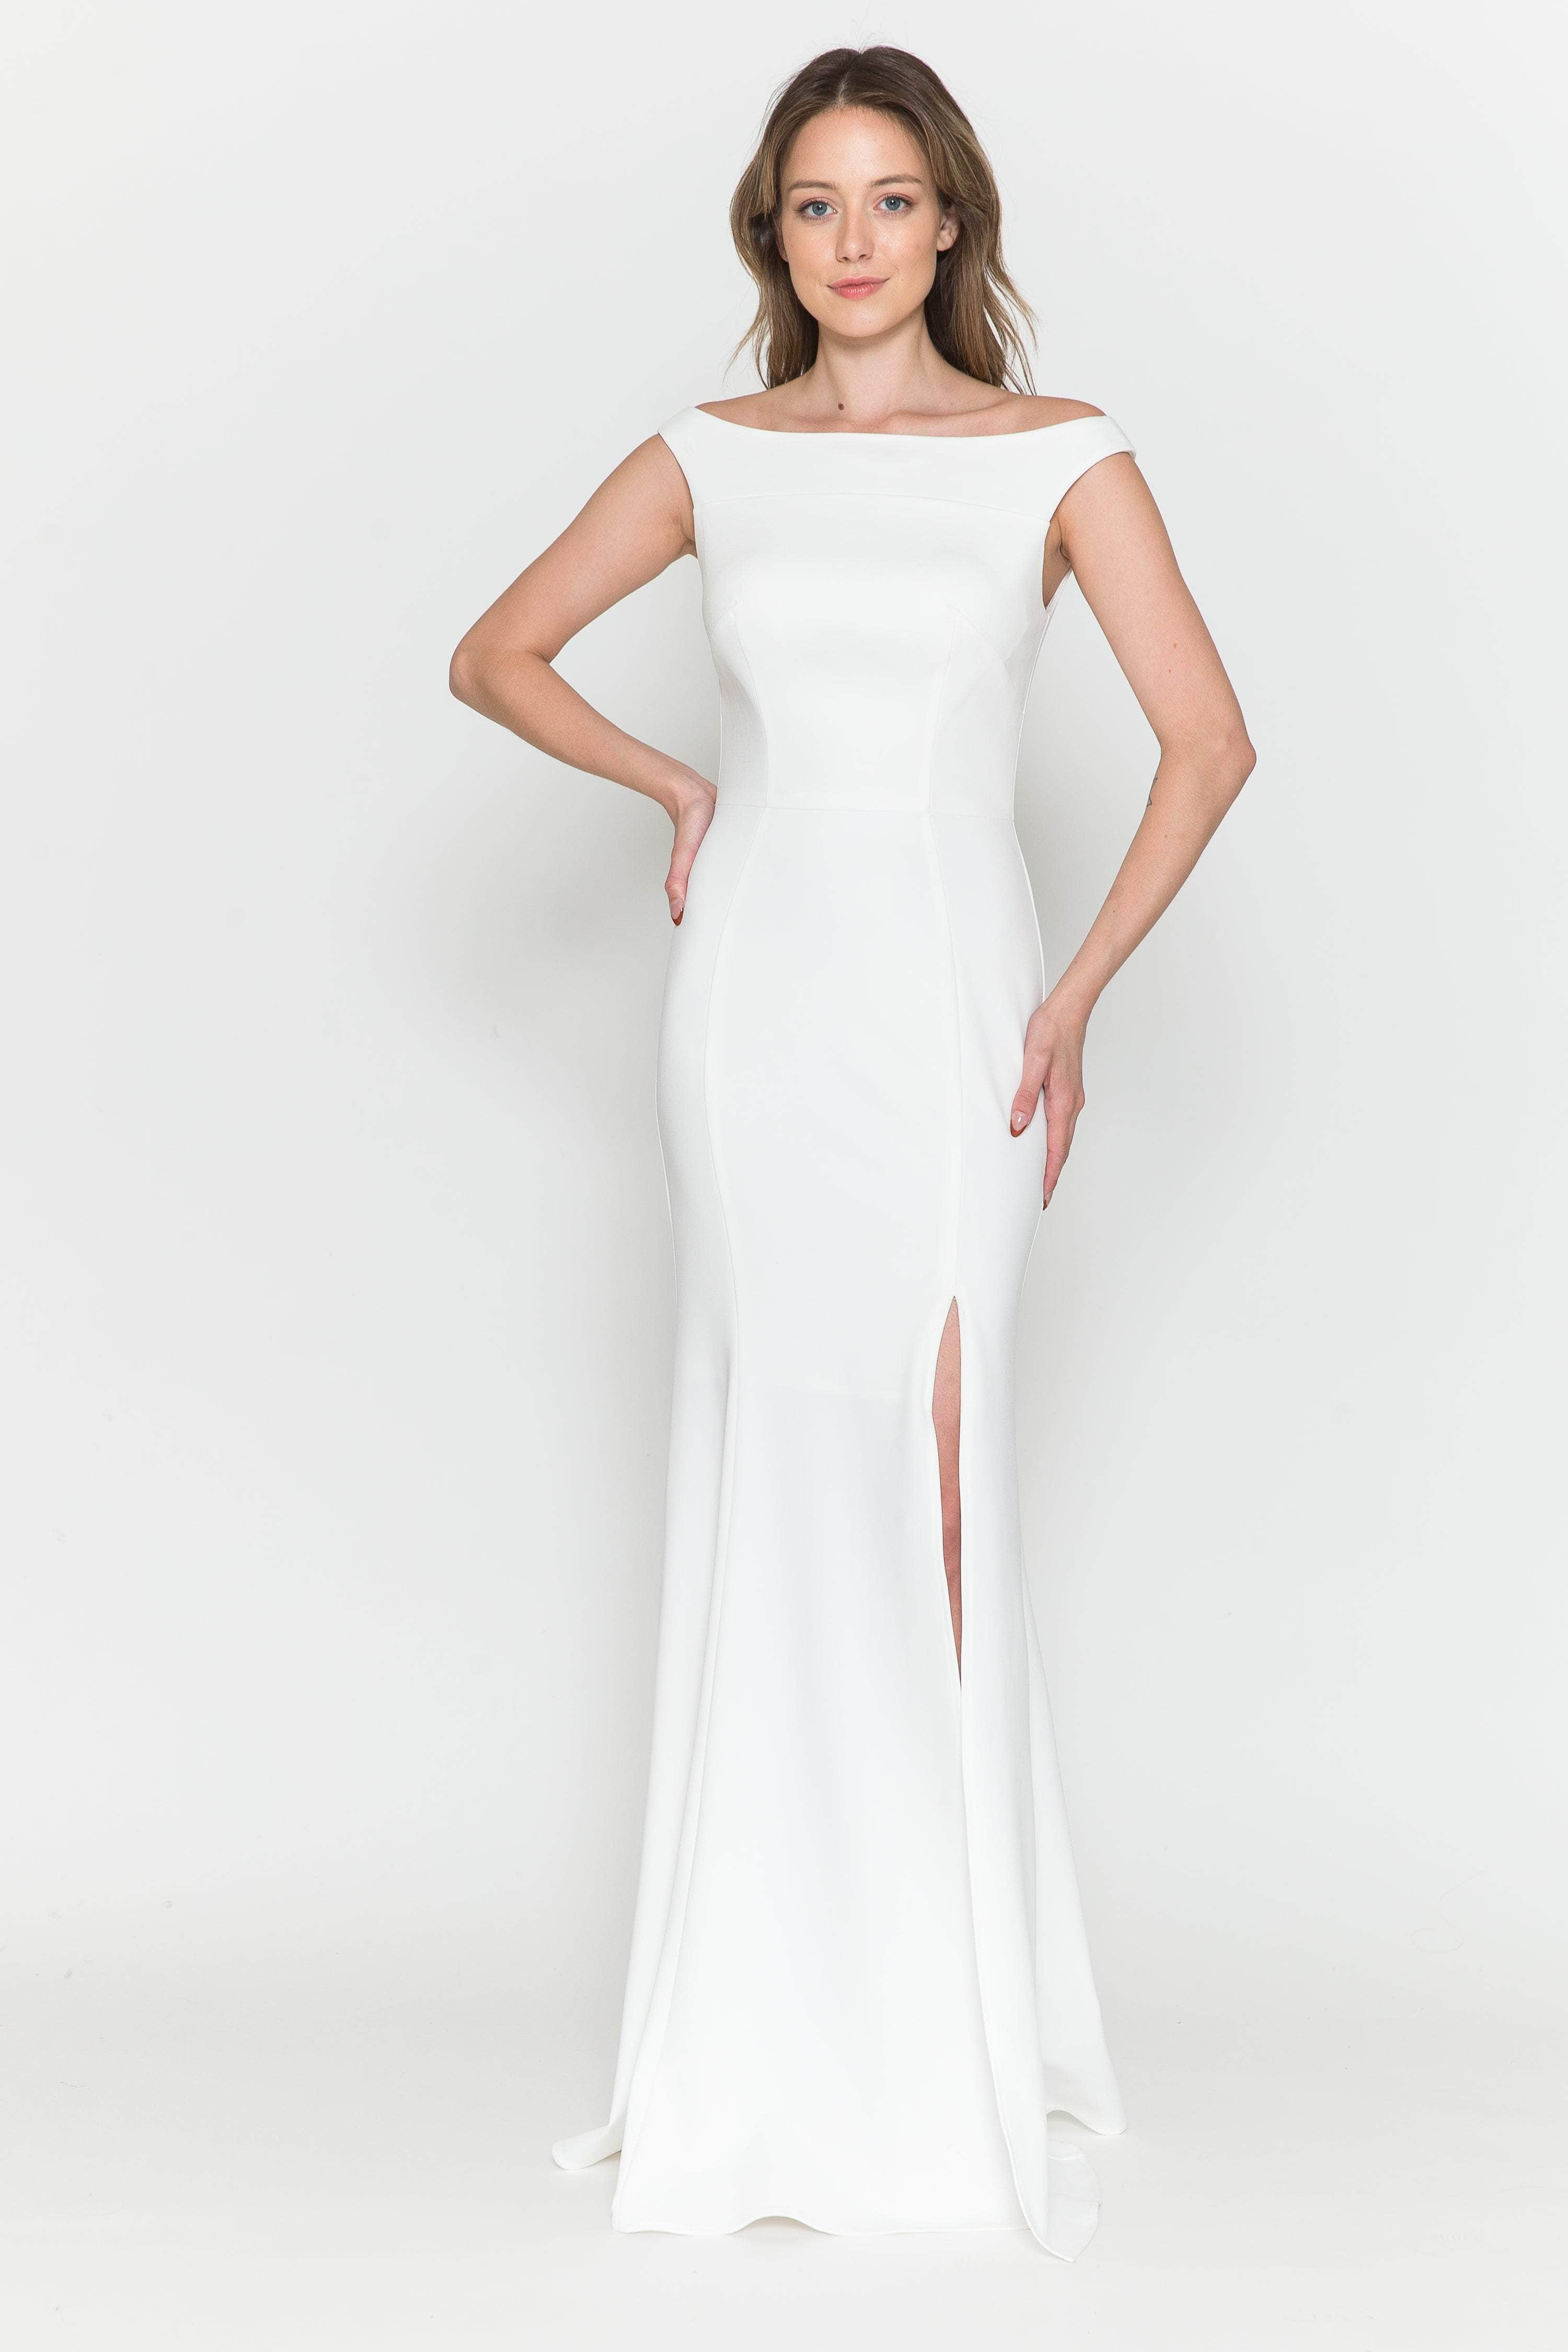 Image of Poly USA 8724 - Off Shoulder Jersey Prom Dress